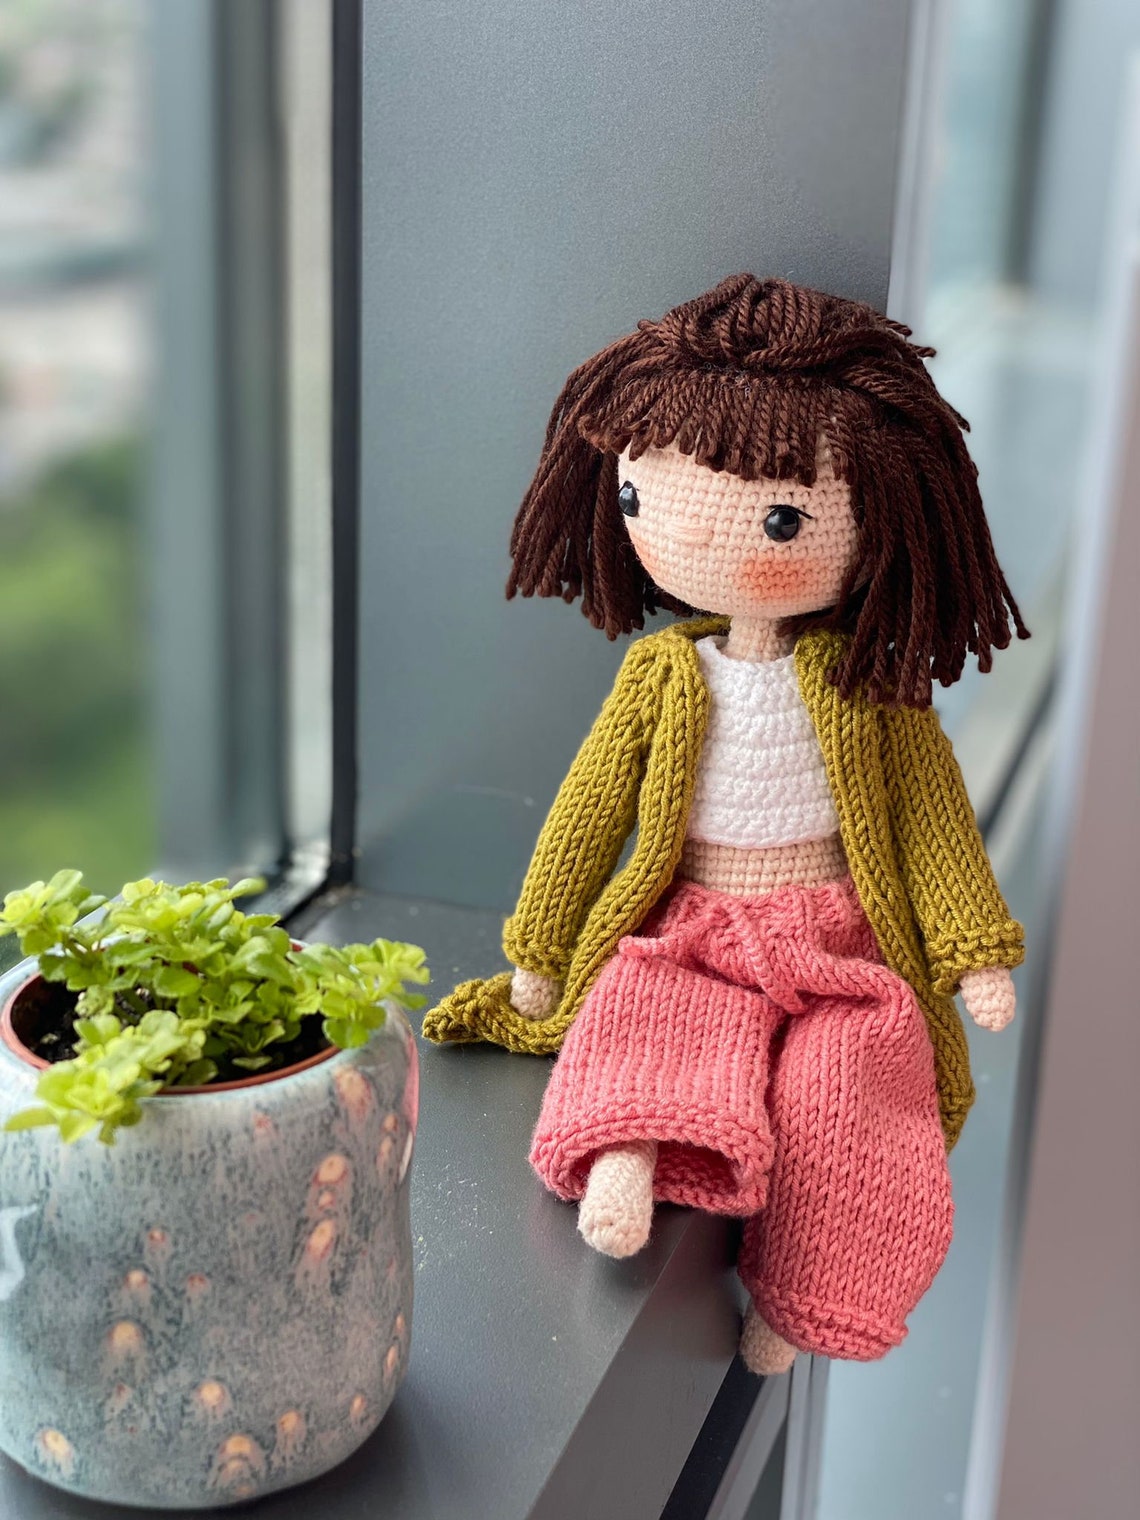 Cool City Girl Birthday Gift Miniature poseable baby Diversity education Unique natural toy bendable puppet Crochet Doll